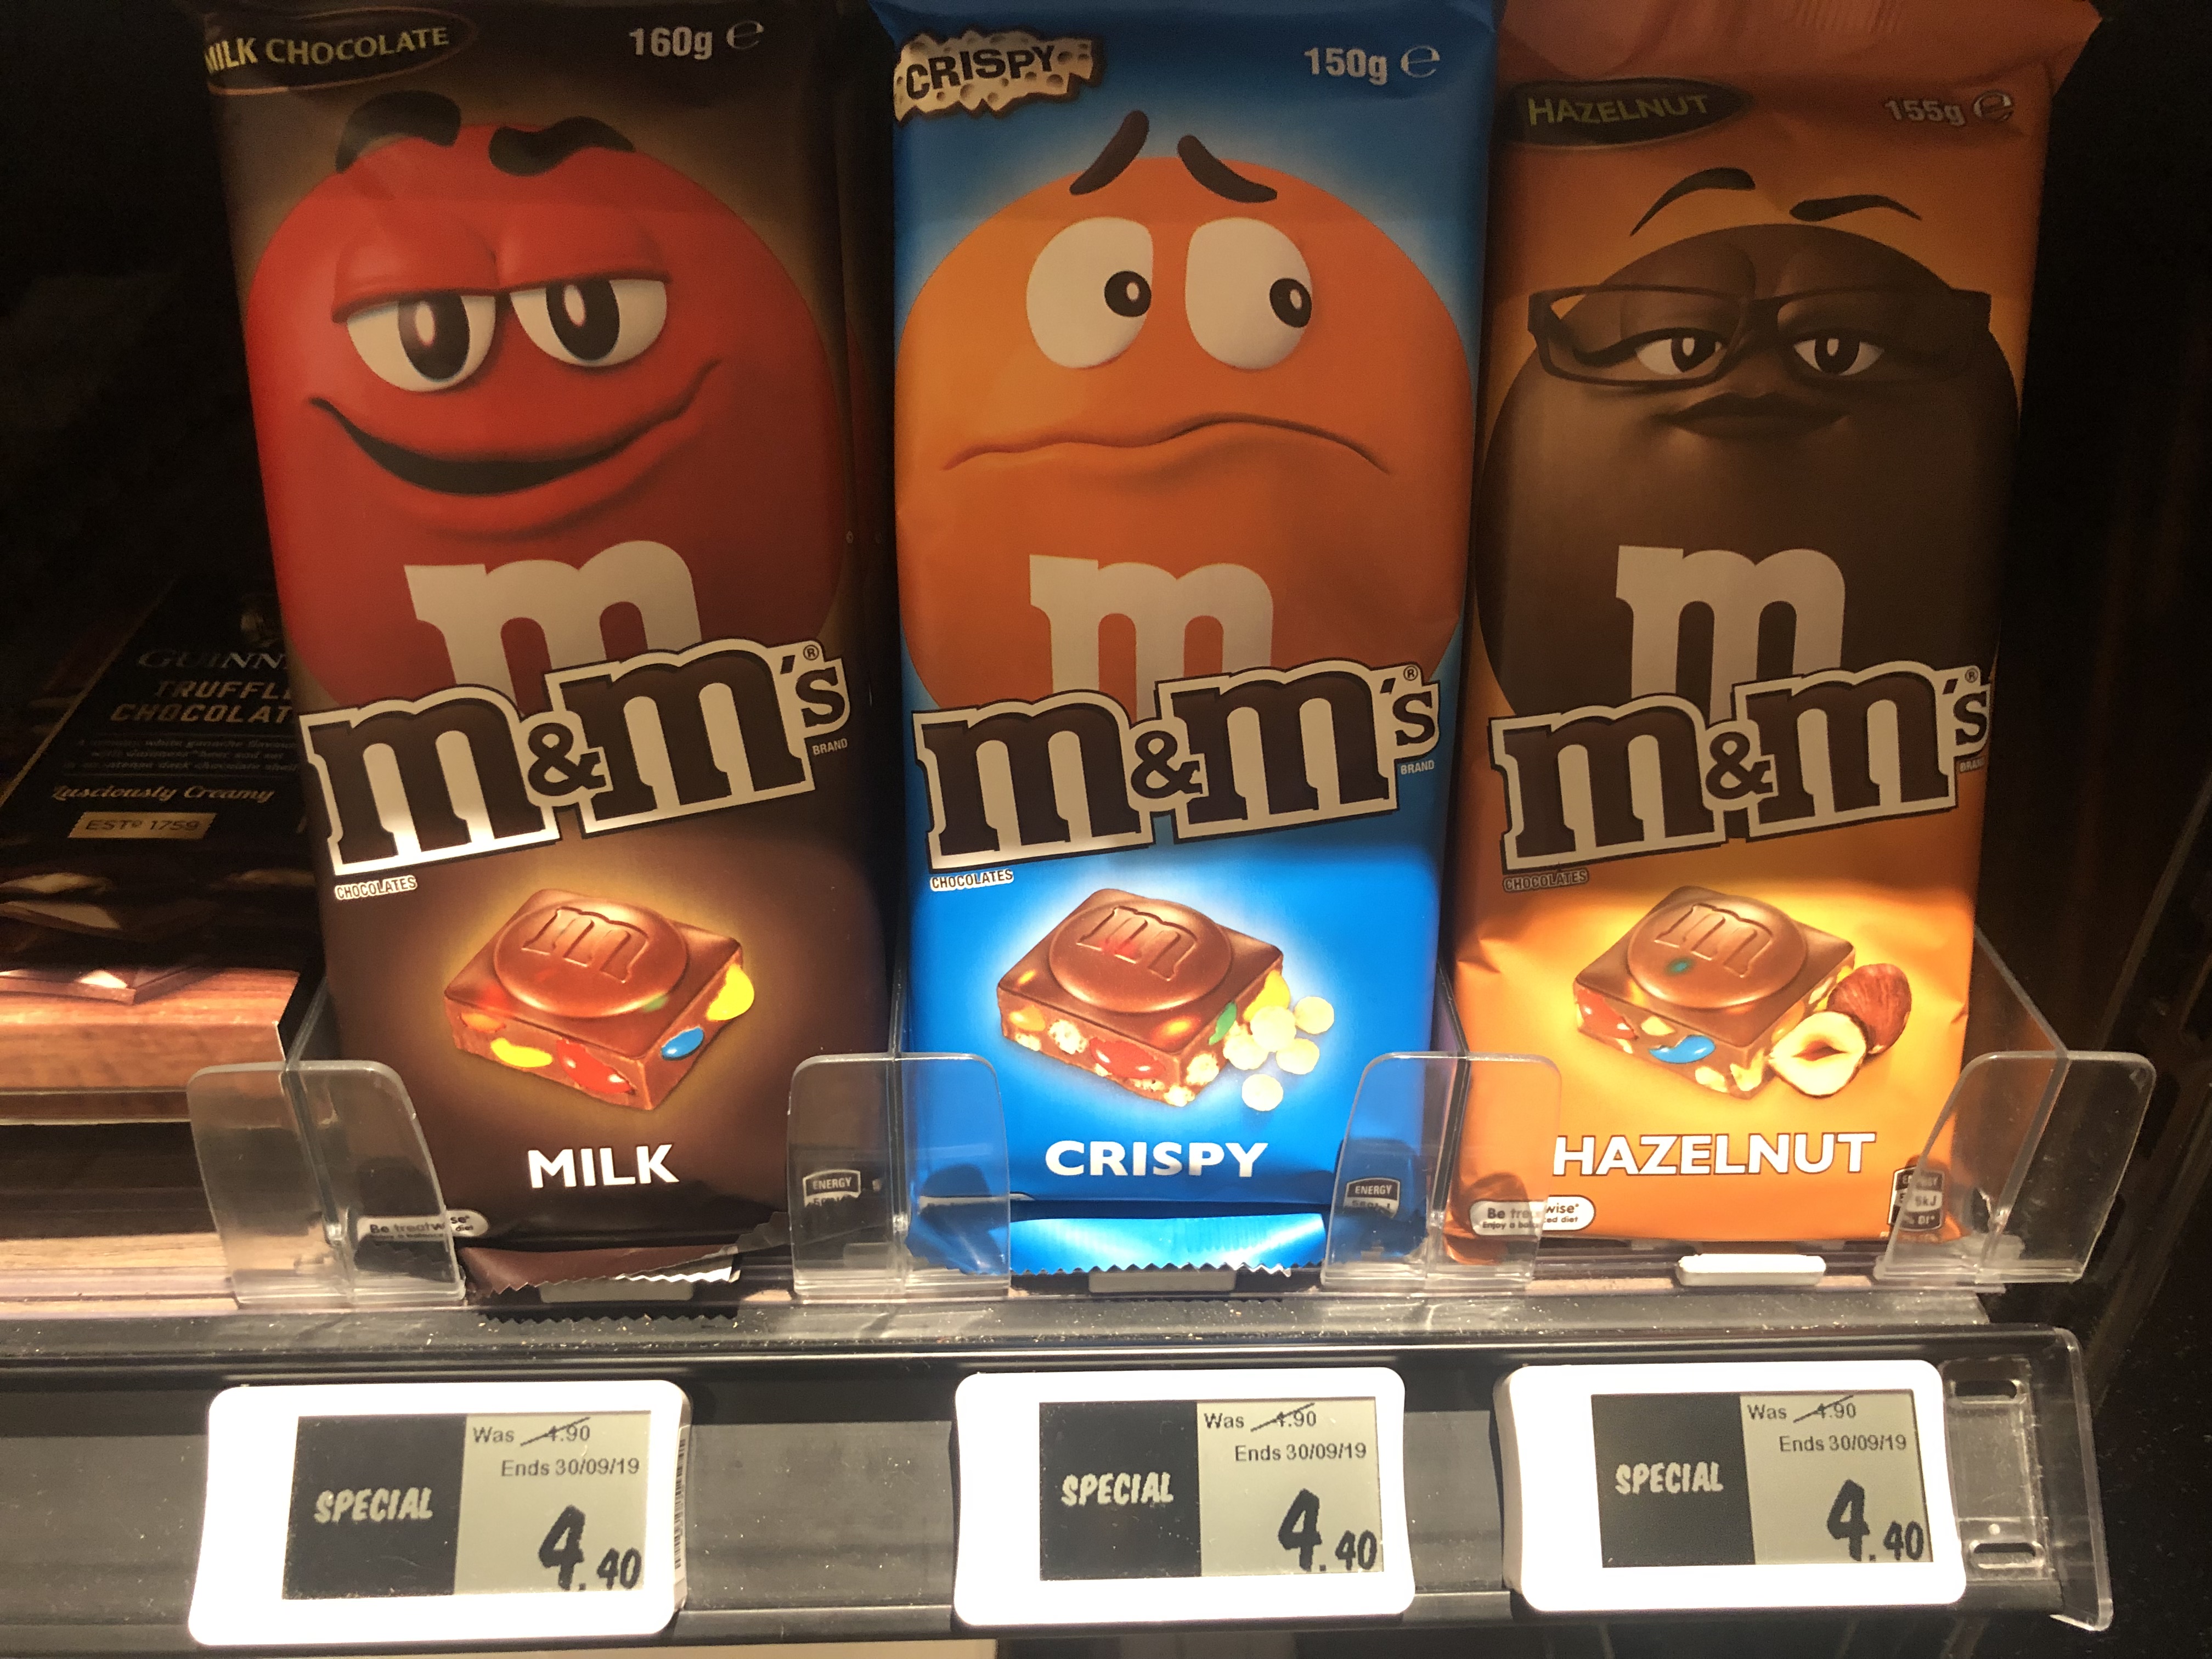 M&M’s Chocolate Bars now available at FairPrice for $4.40 - 1